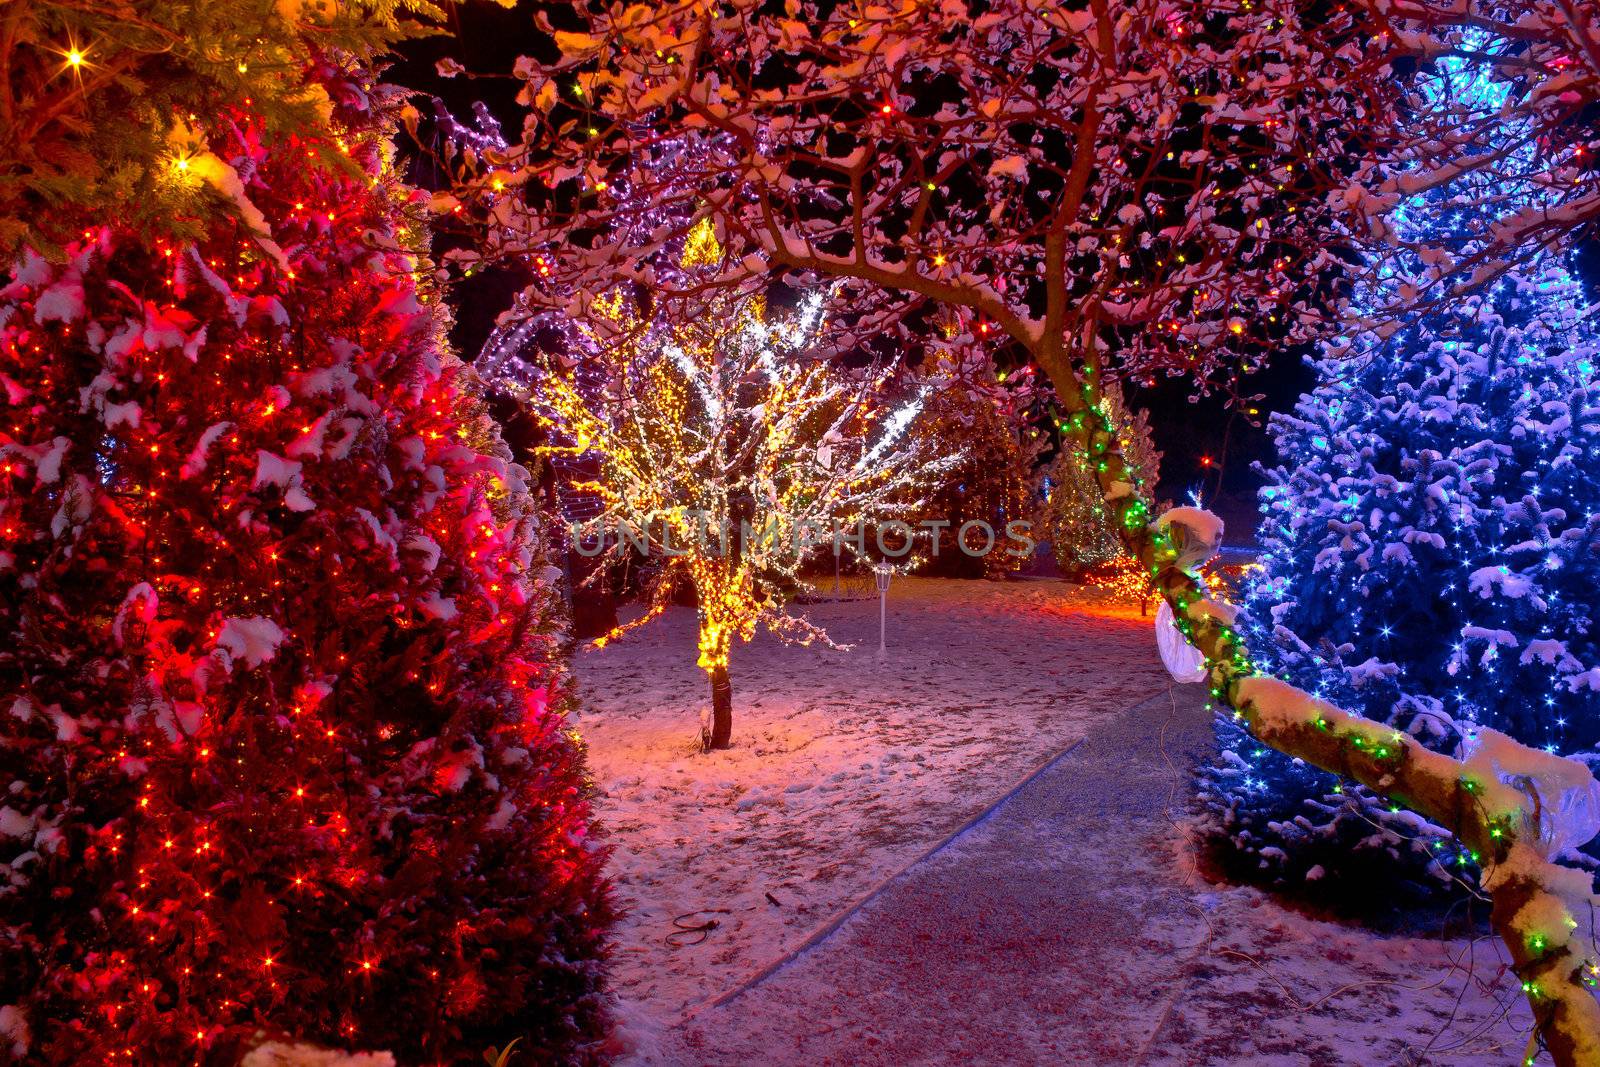 Colorful Christmas lights on trees by xbrchx